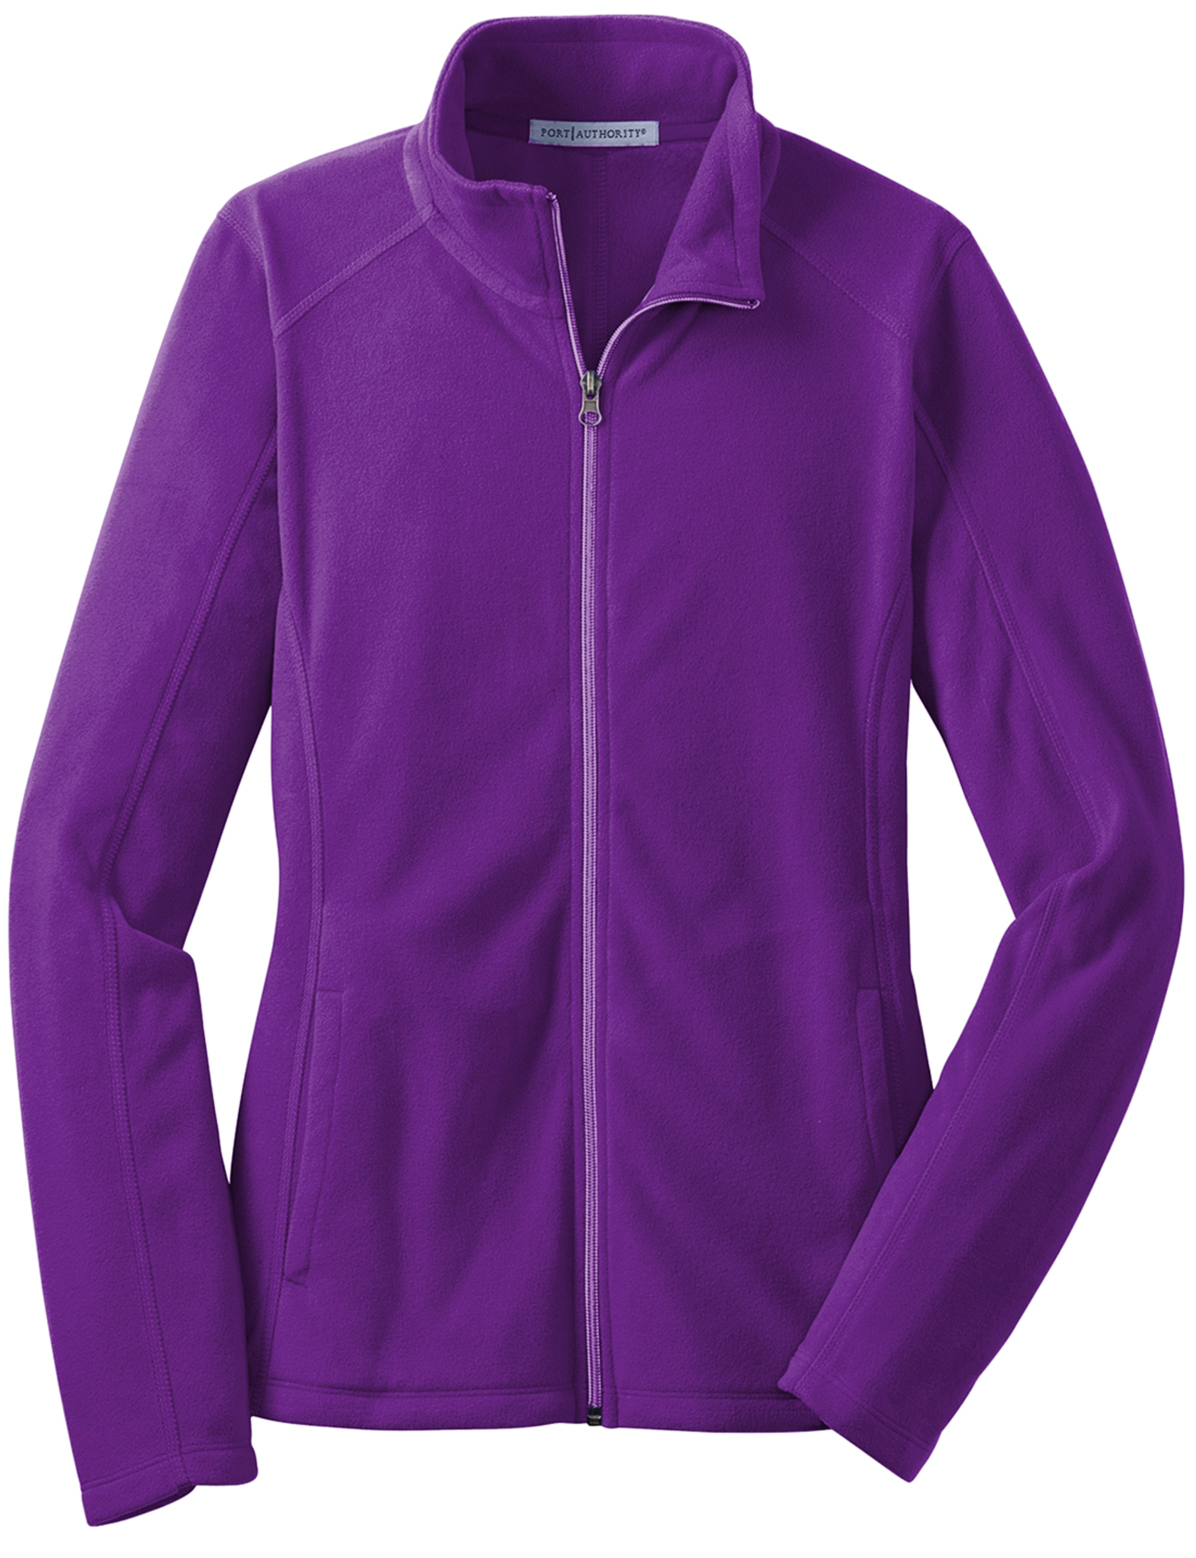 Integrated Services - Harm Reduction - Ladies Microfleece Jacket